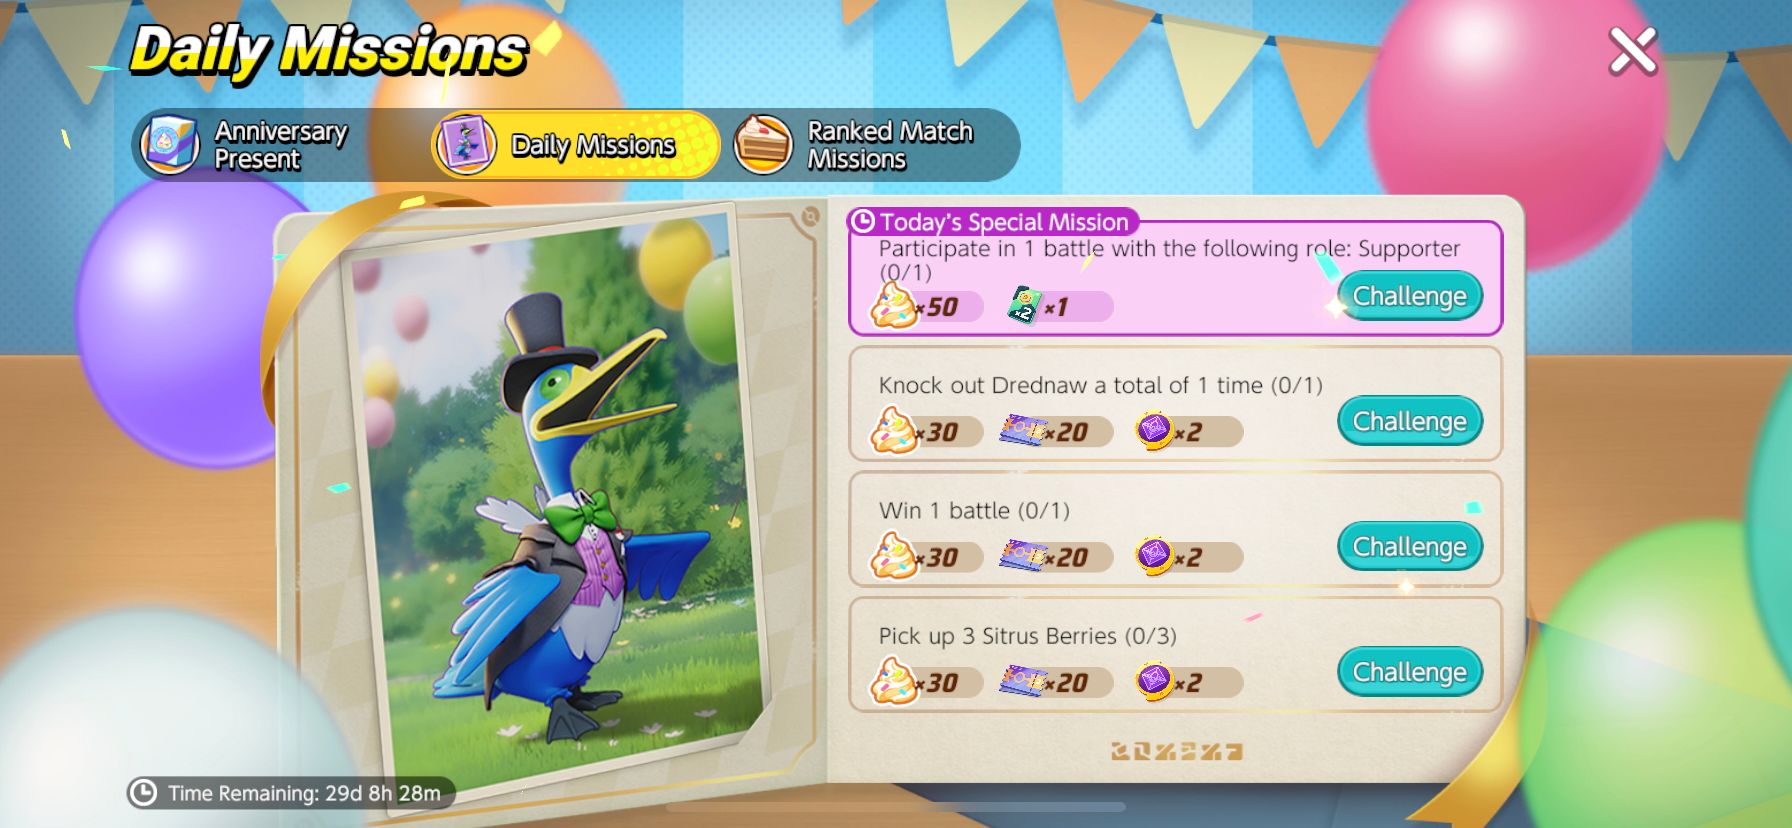 Anniversary Cake Challenge Daily Missions page from Pokemon Unite